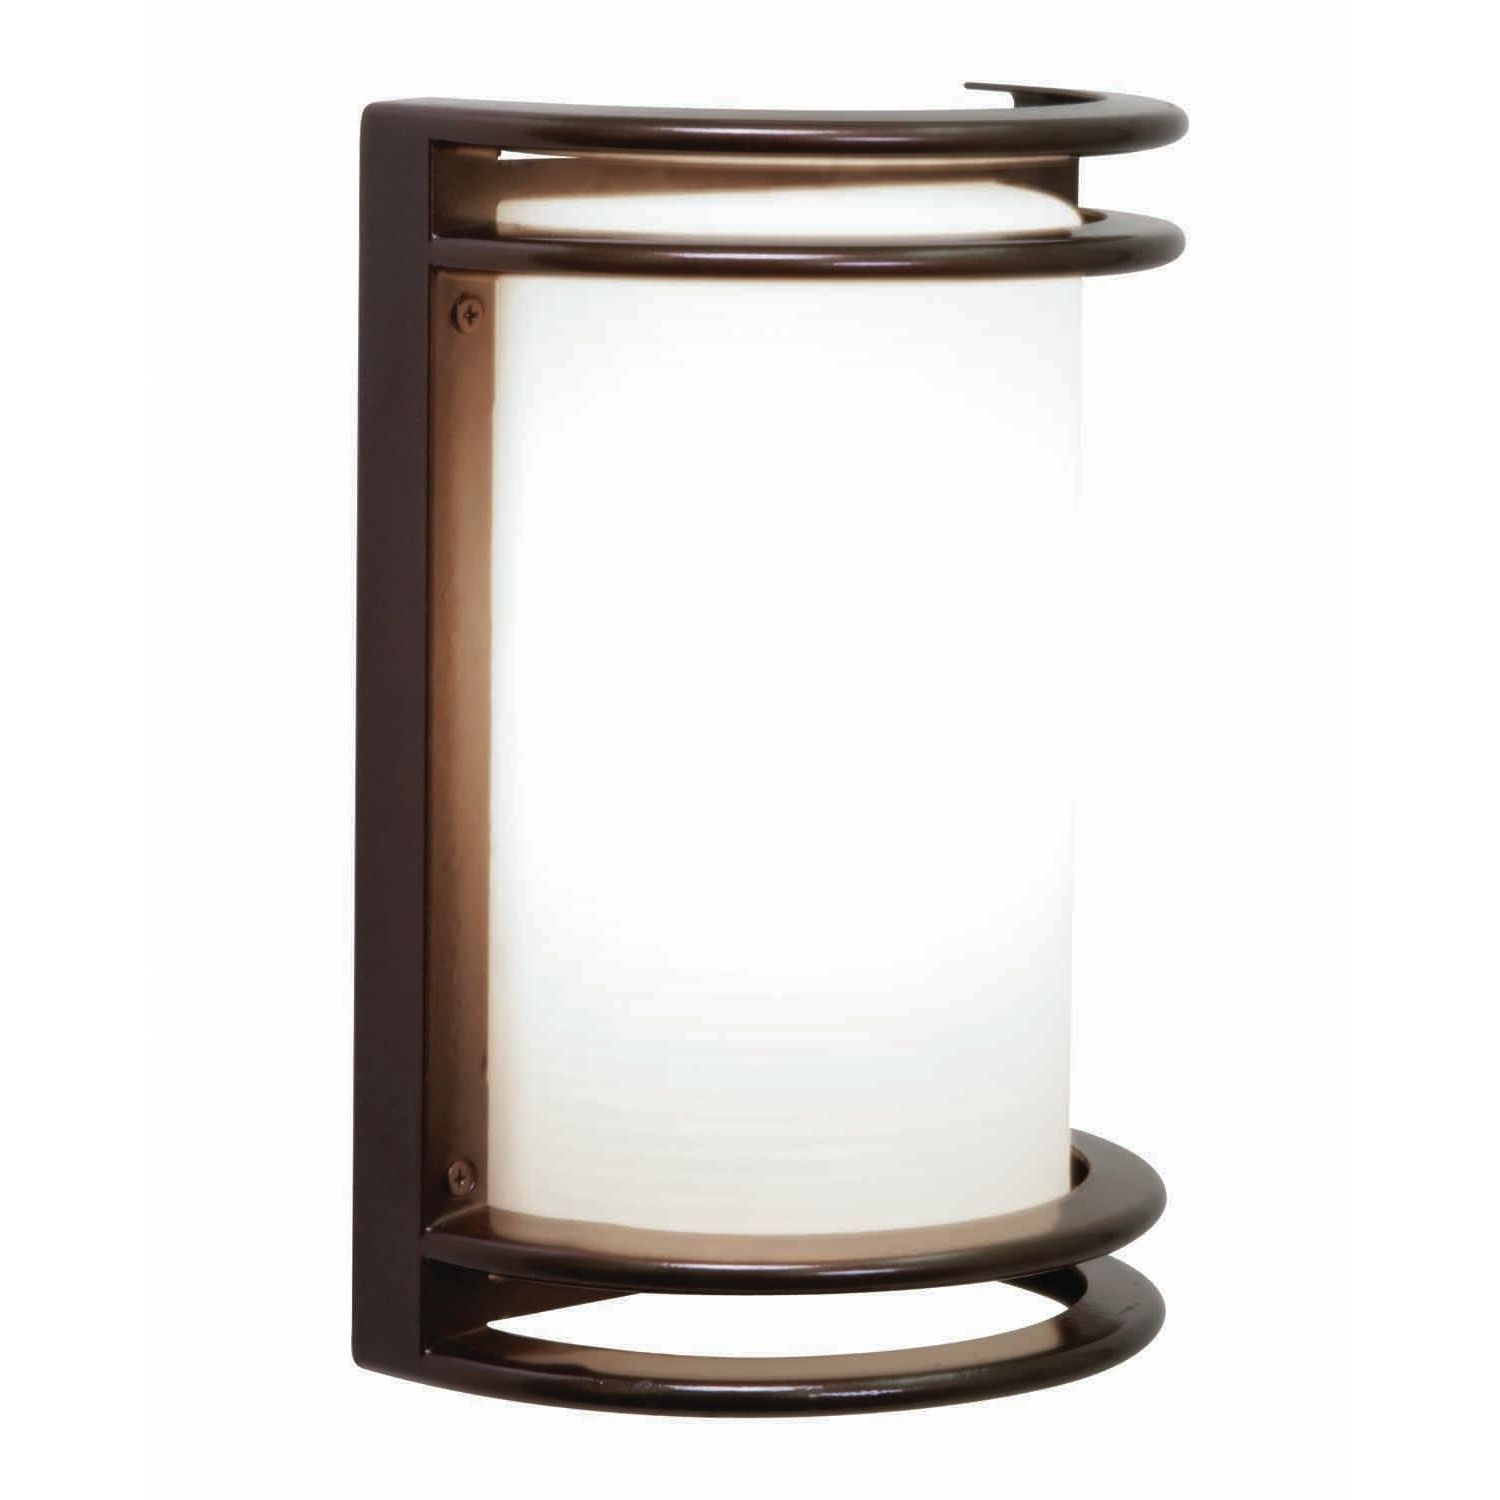 Access Lighting Outdoor Wall Sconce • Wall Sconces Throughout Access Lighting Outdoor Wall Sconces (View 3 of 15)